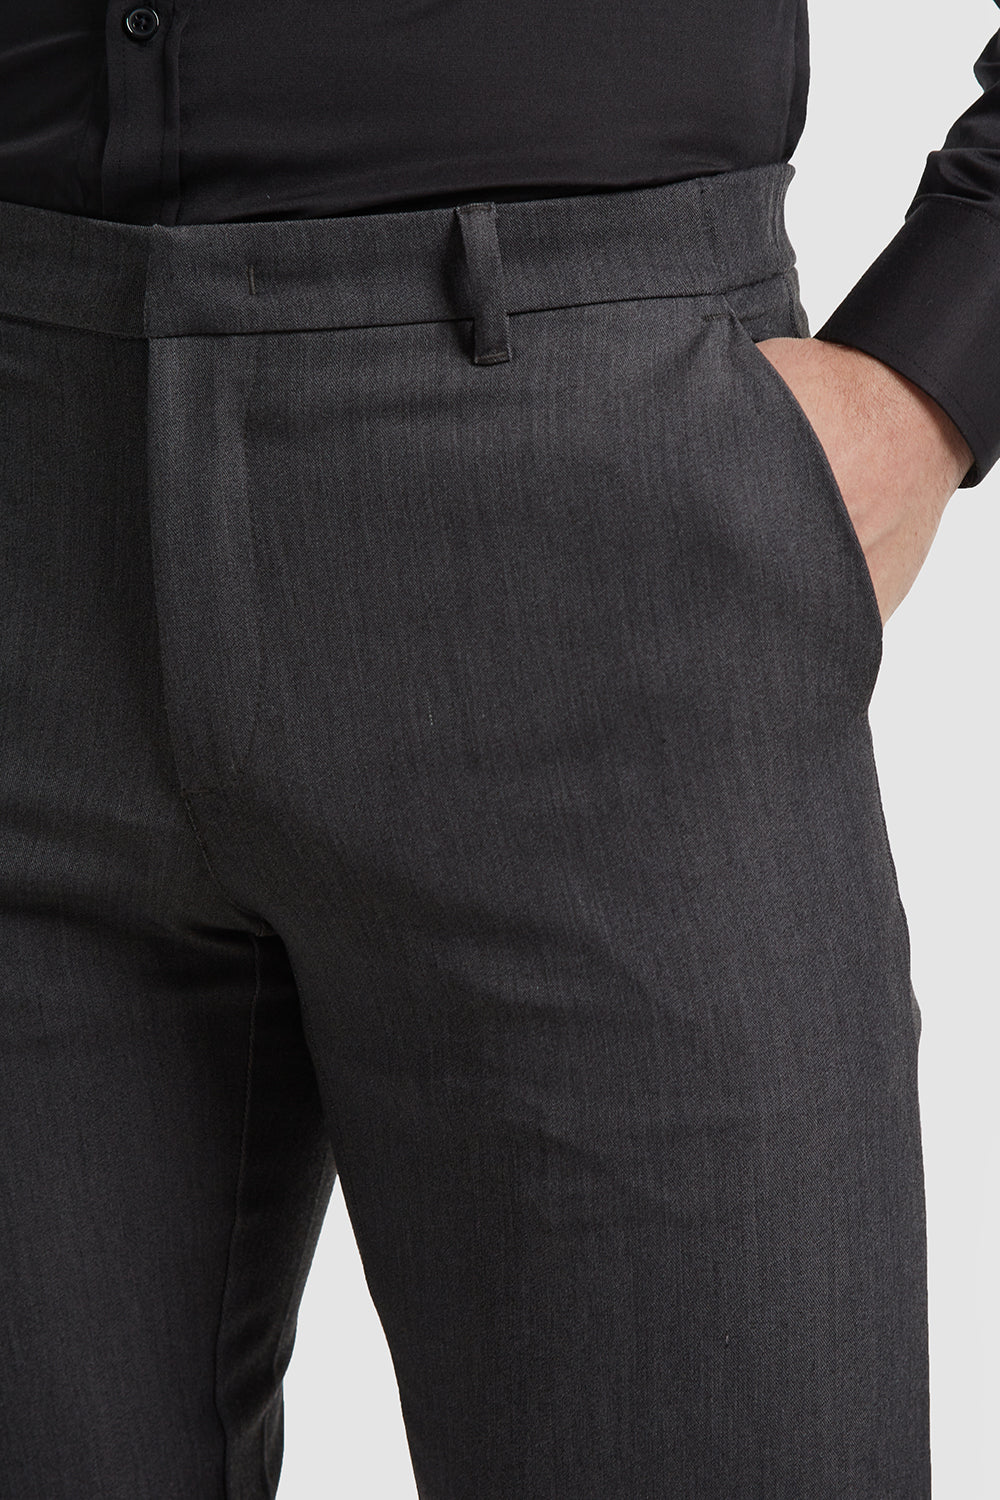 Everything you need to know about morning suit trousers – Favourbrook